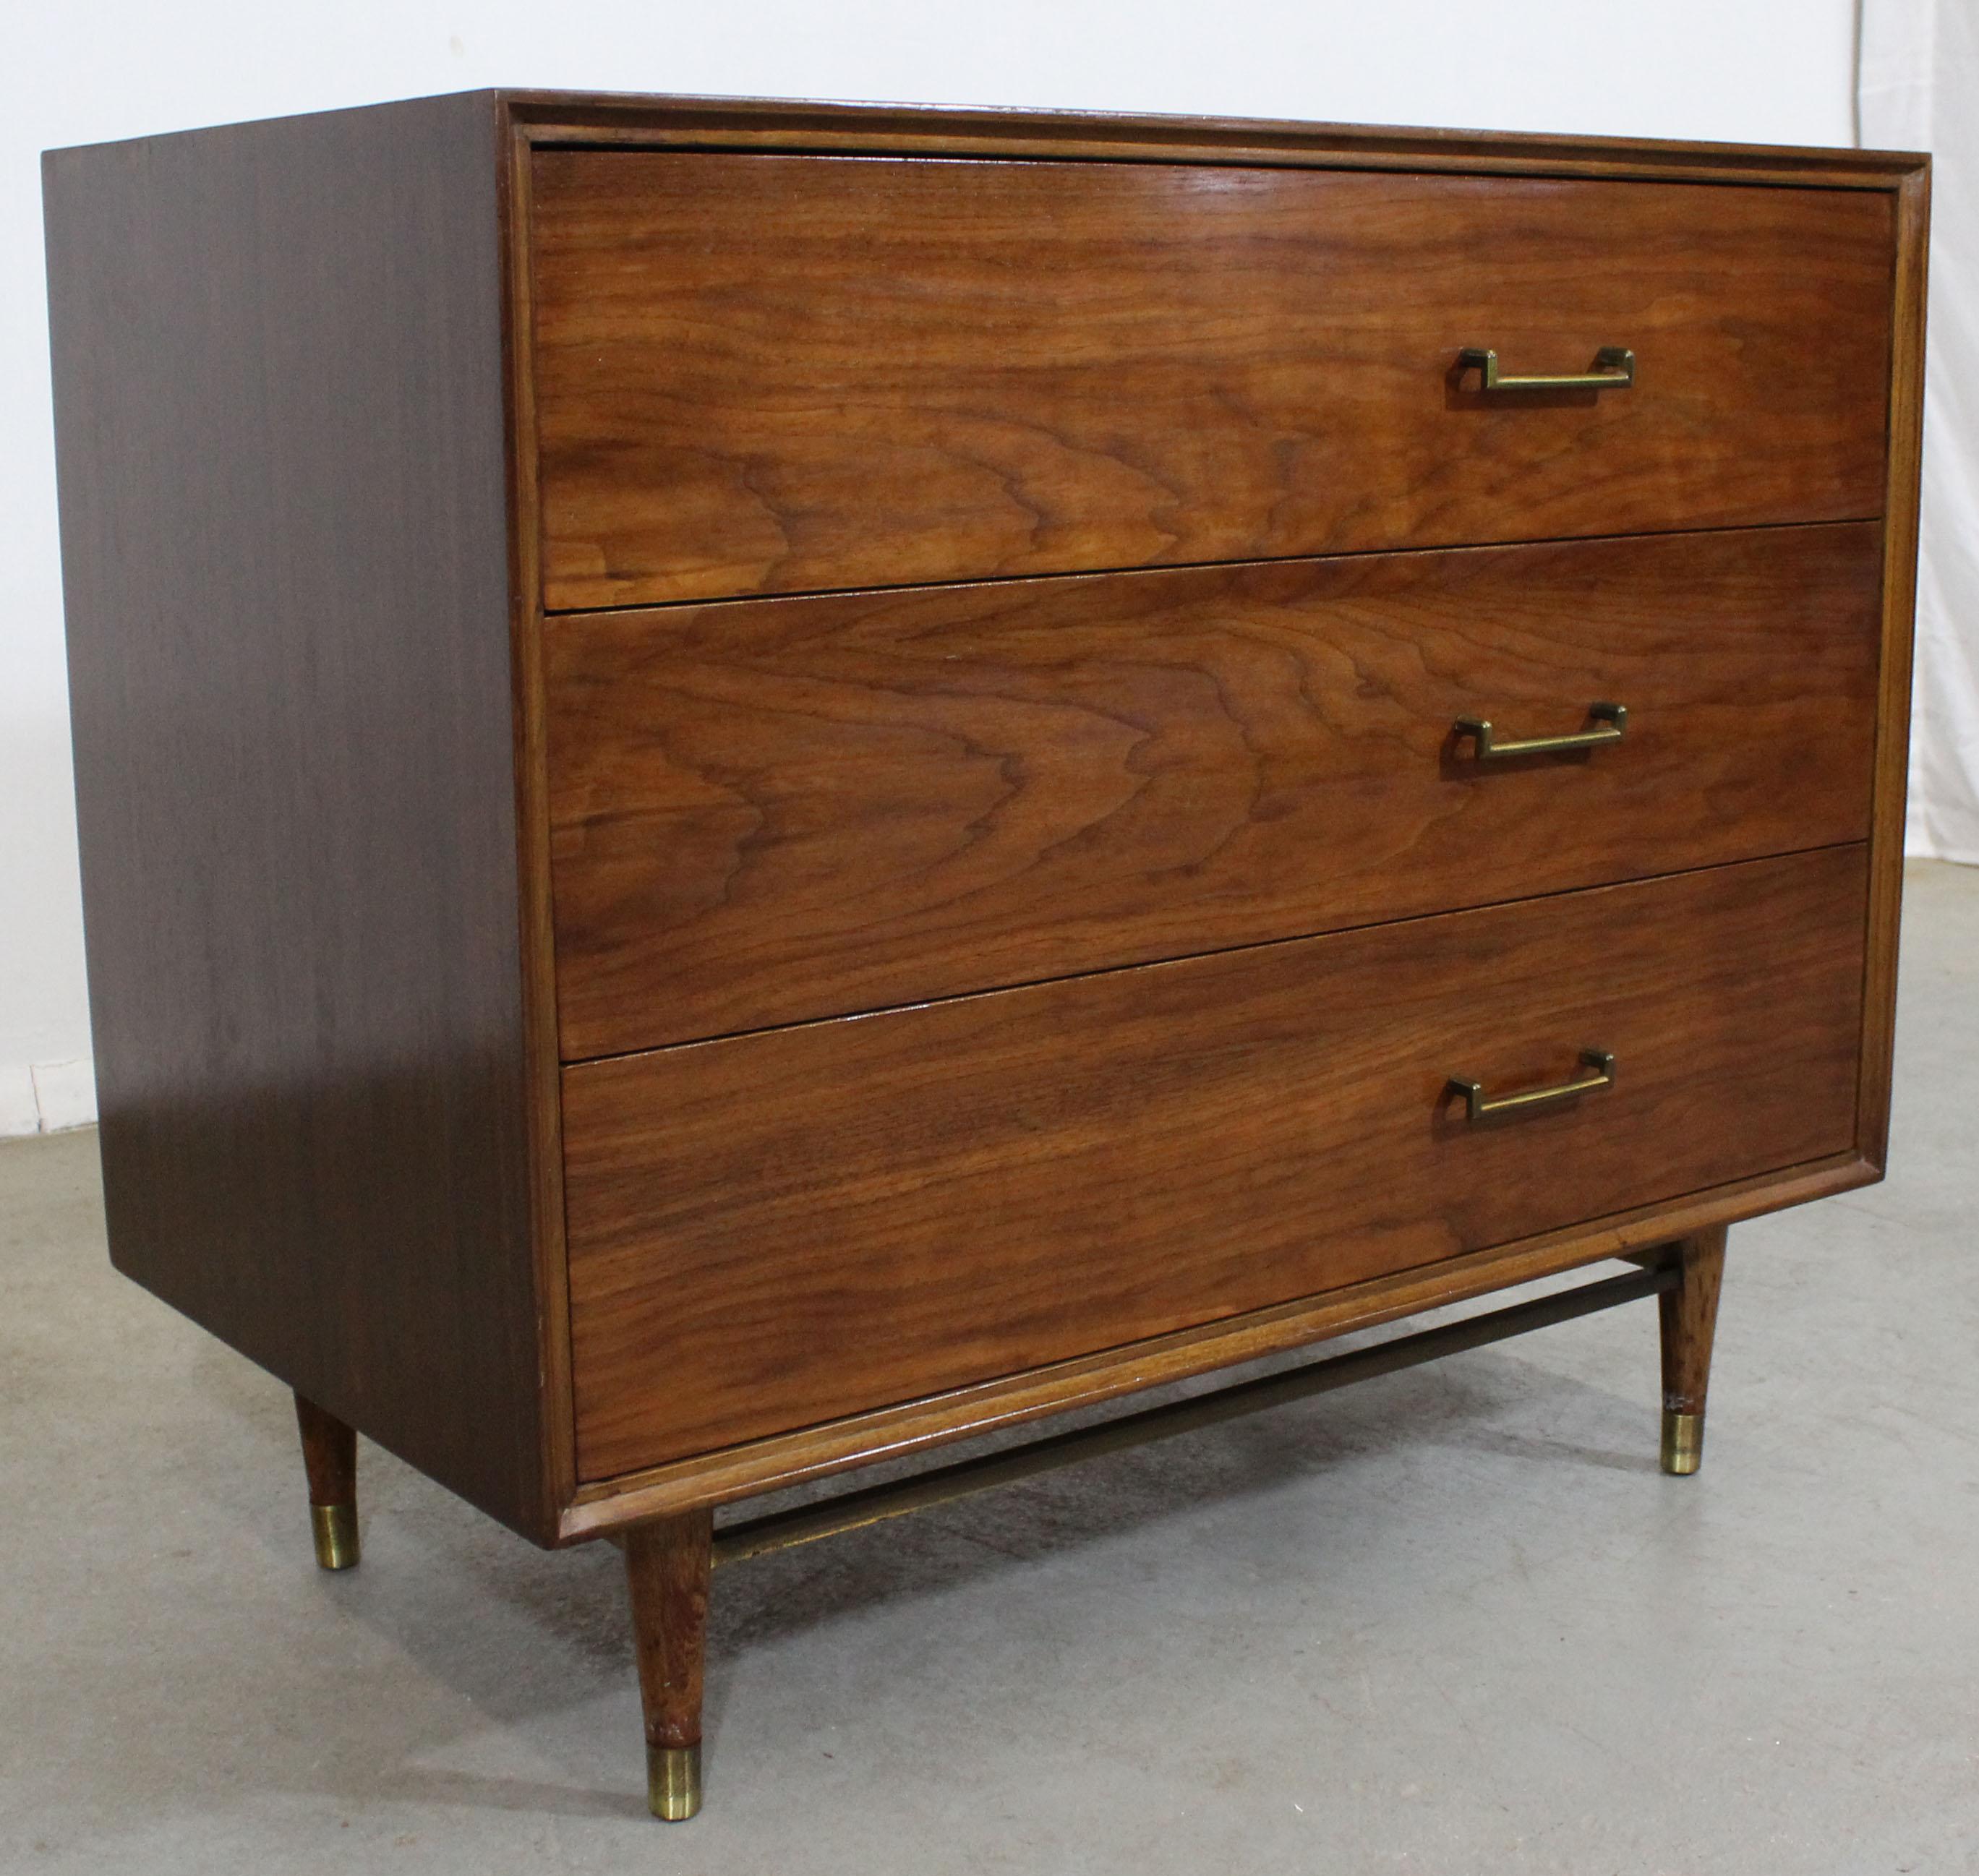 Offered is a perfect example of American Mid-Century Modern furniture; a walnut and brass bachelor chest, believed to be designed by Mark J. Furst & Robert Fellner for Furnette. Features three drawers with pulls skewed to the right. It is in good